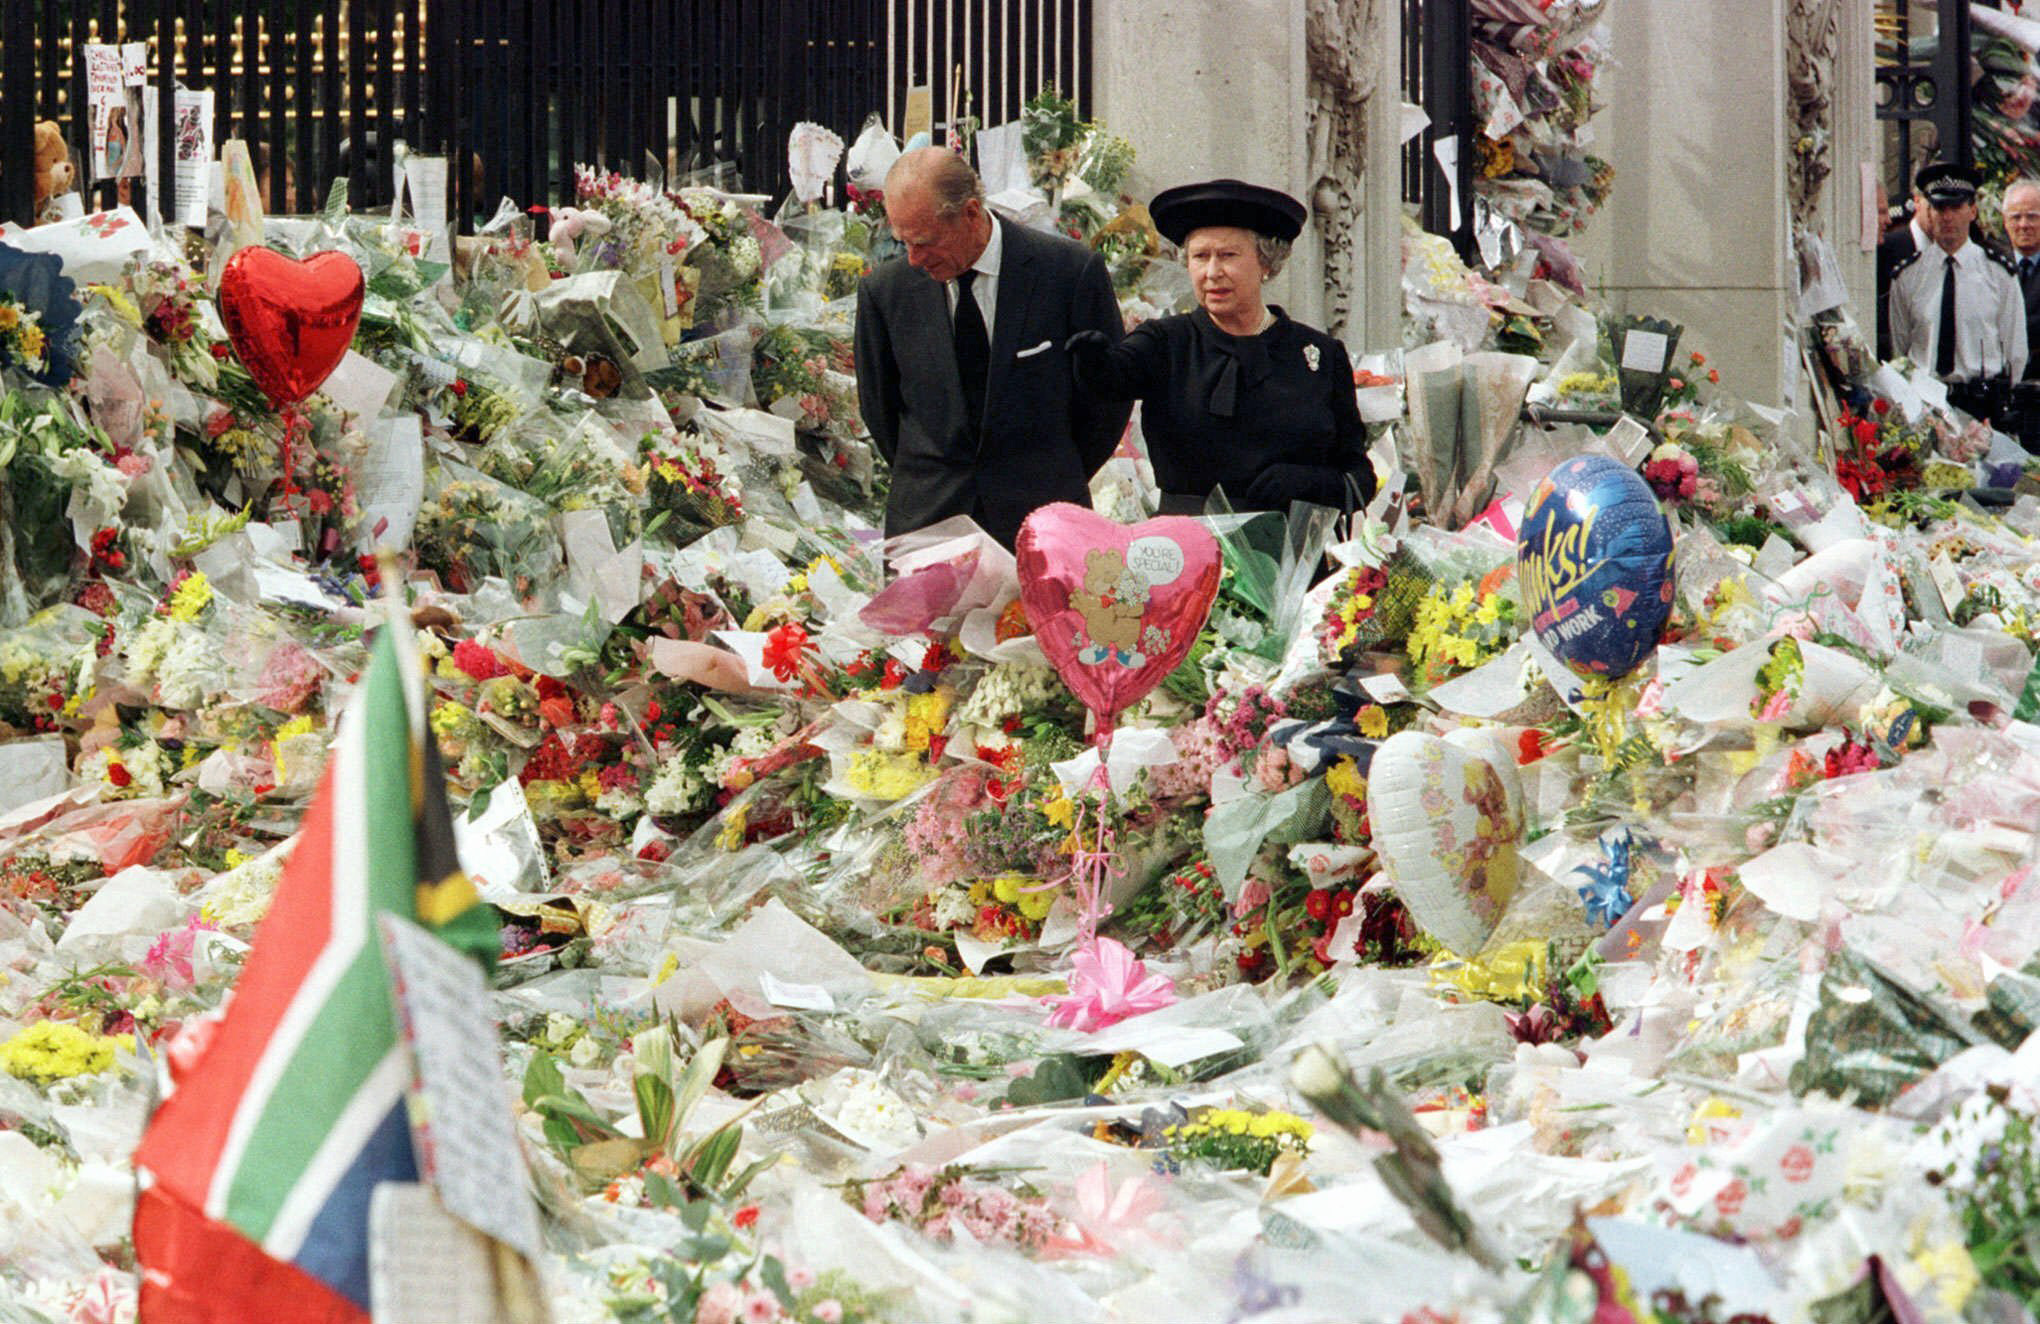 Britain's Queen Elizabeth II and Prince Philip view the floral tributes to Diana, Princess of Wales, at London's Buckingham Palace, Sept. 5, 1997. (Pool Photo via AP)